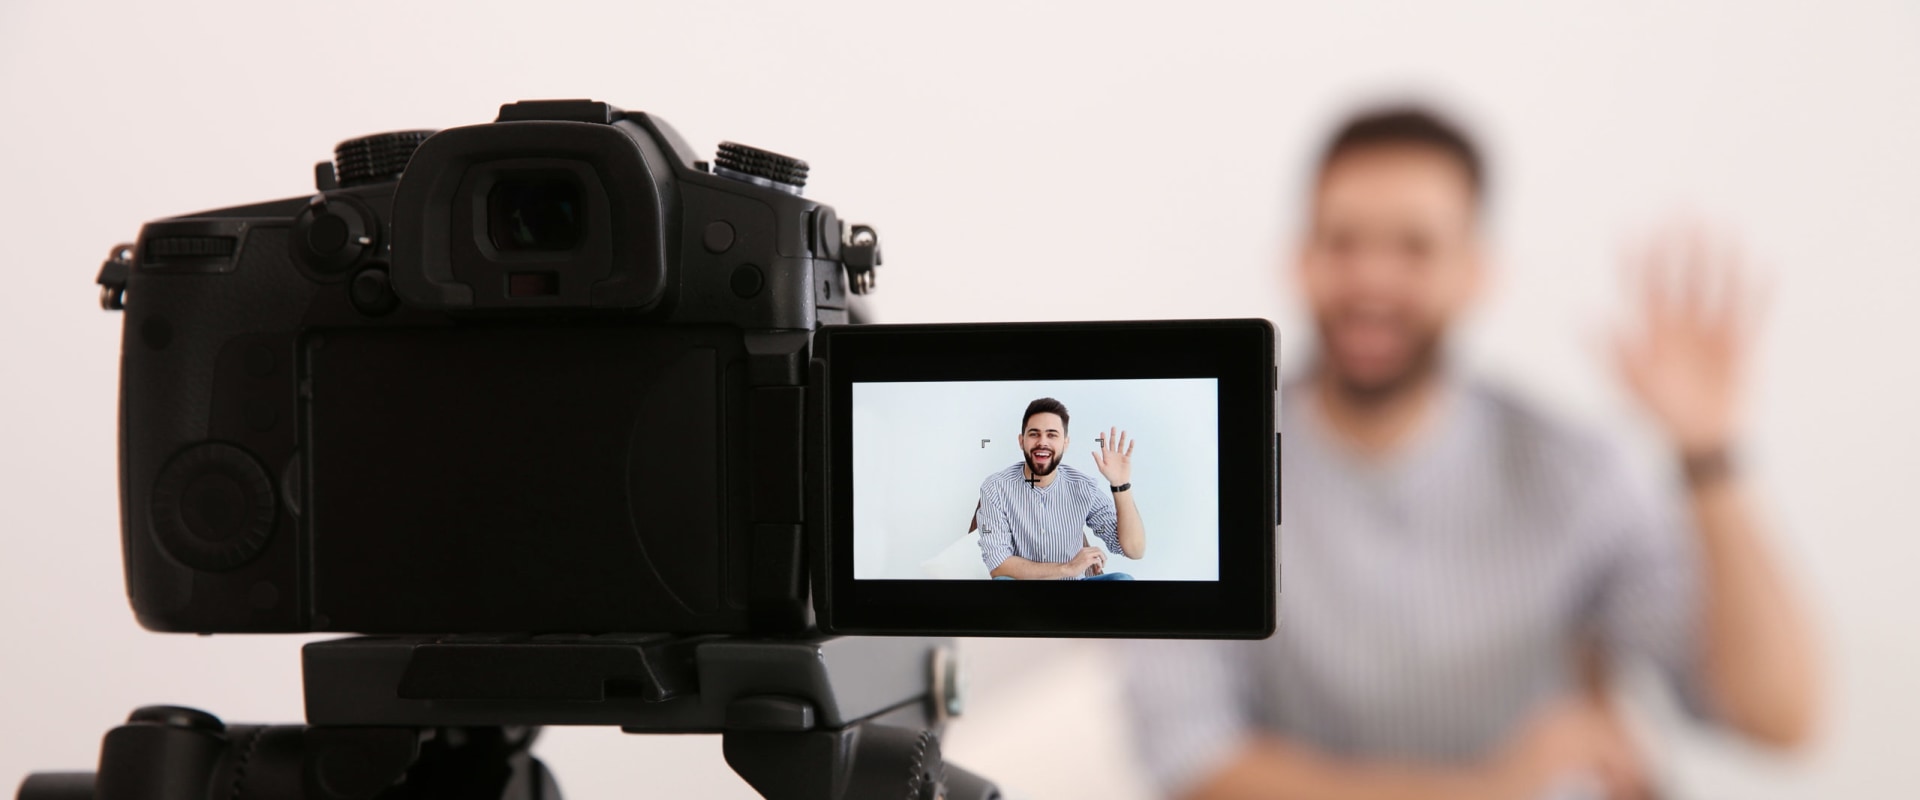 How do you create content for video marketing?